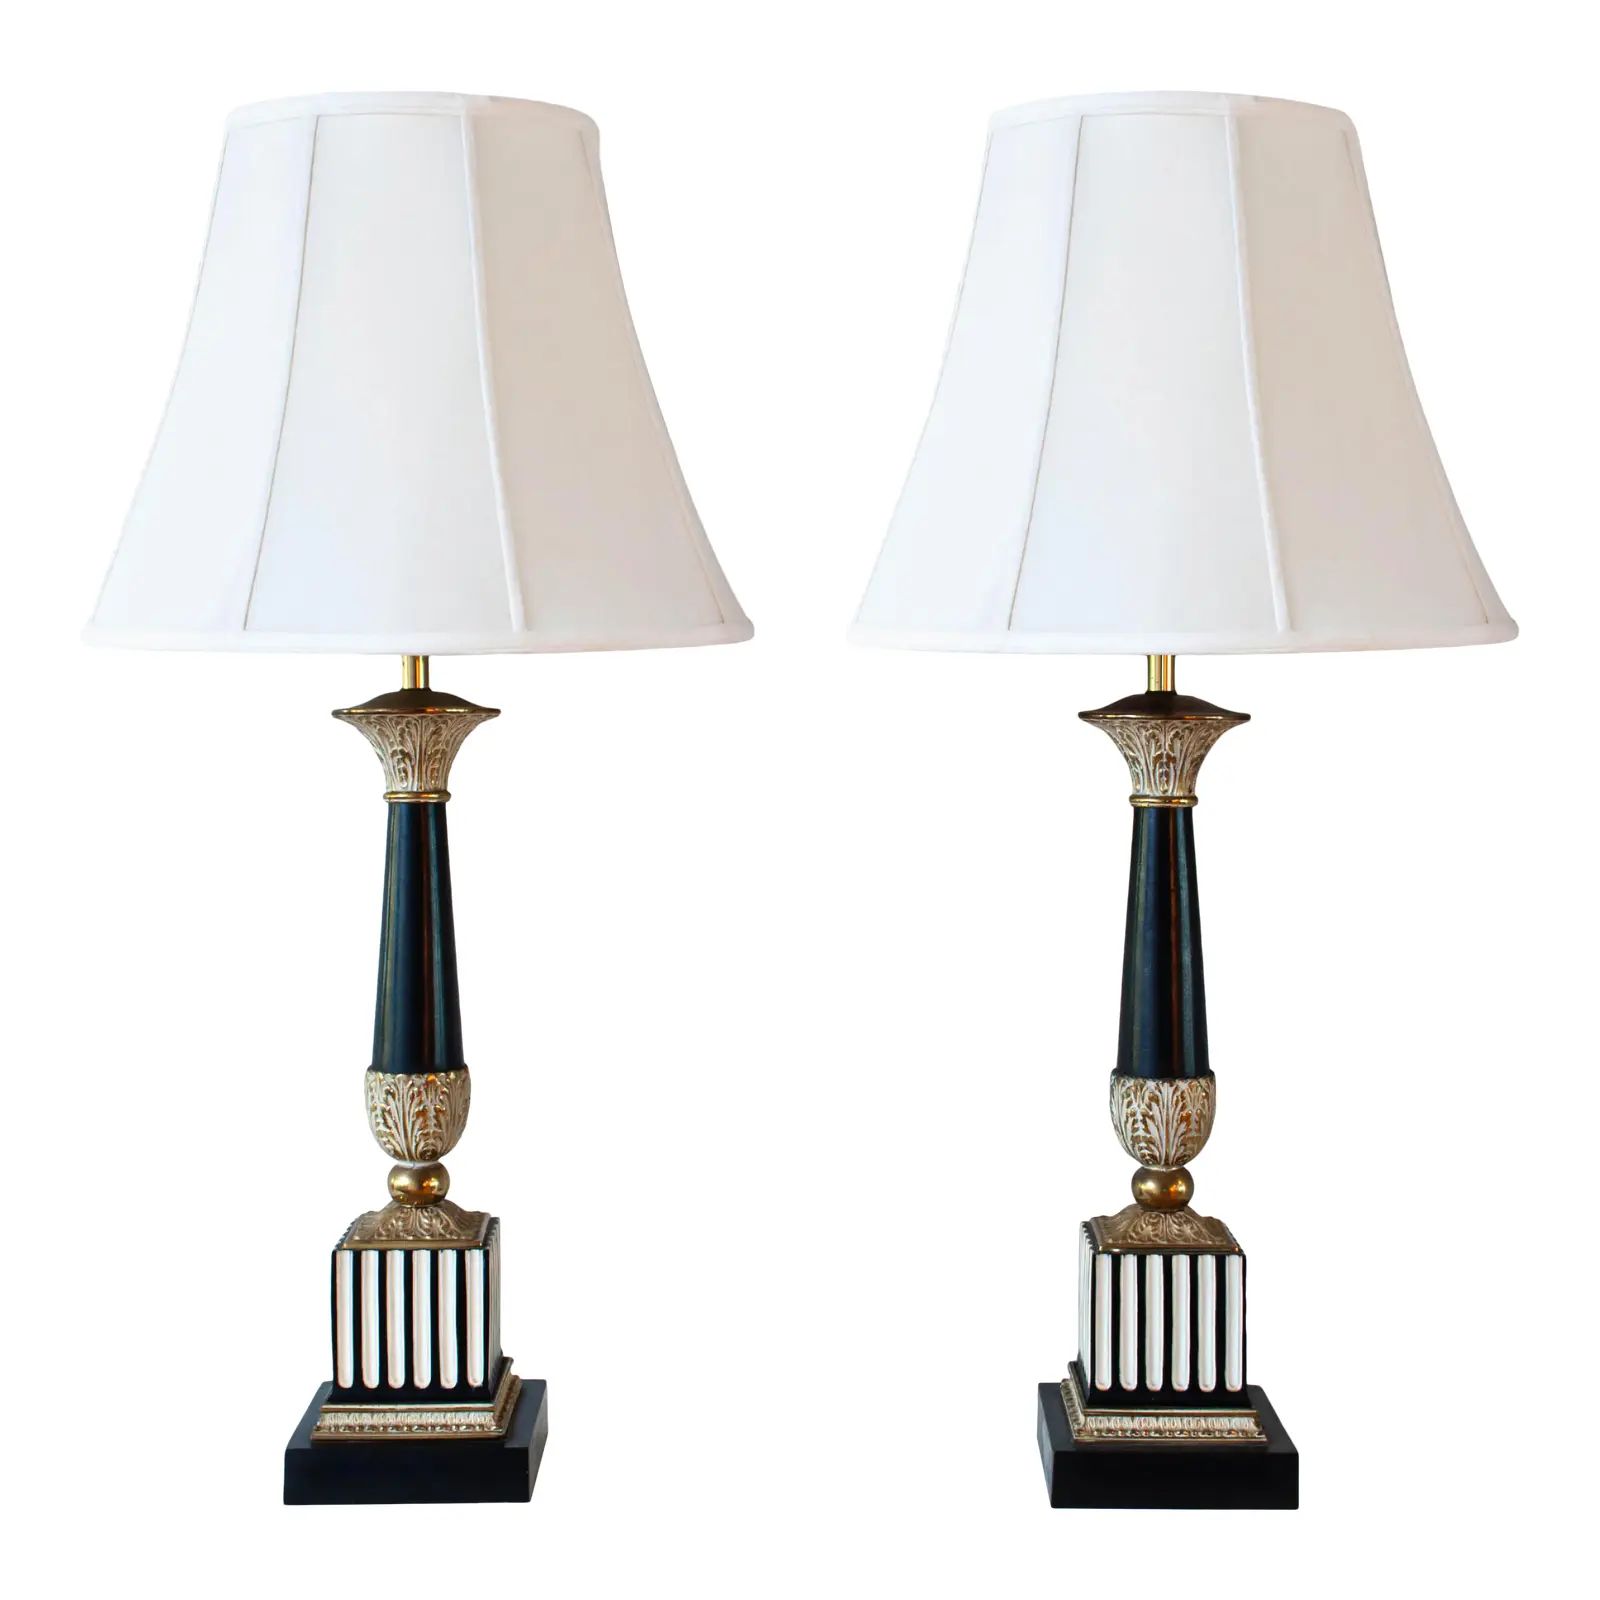 Hollywood Regency Black, White, Gold Lamps - a Pair | Chairish